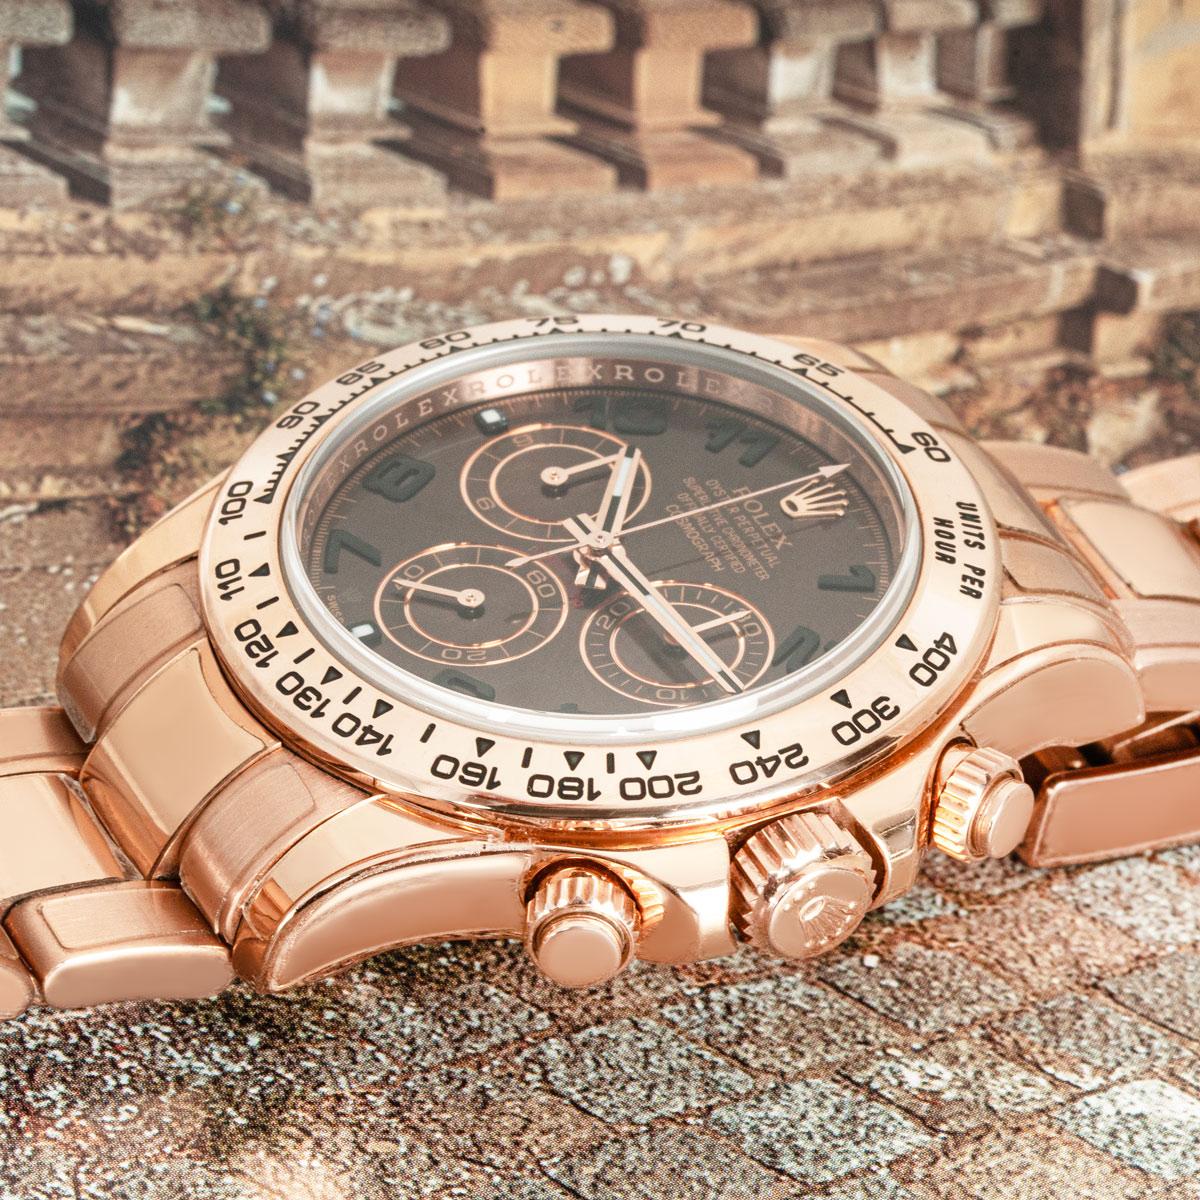 A 116505 rose gold Daytona by Rolex. Featuring the discontinued chocolate dial with Arabic numbers. With its engraved tachymetric scale, three counters and pushers, this is a high-performance chronograph.
1
Fitted with a sapphire crystal and a